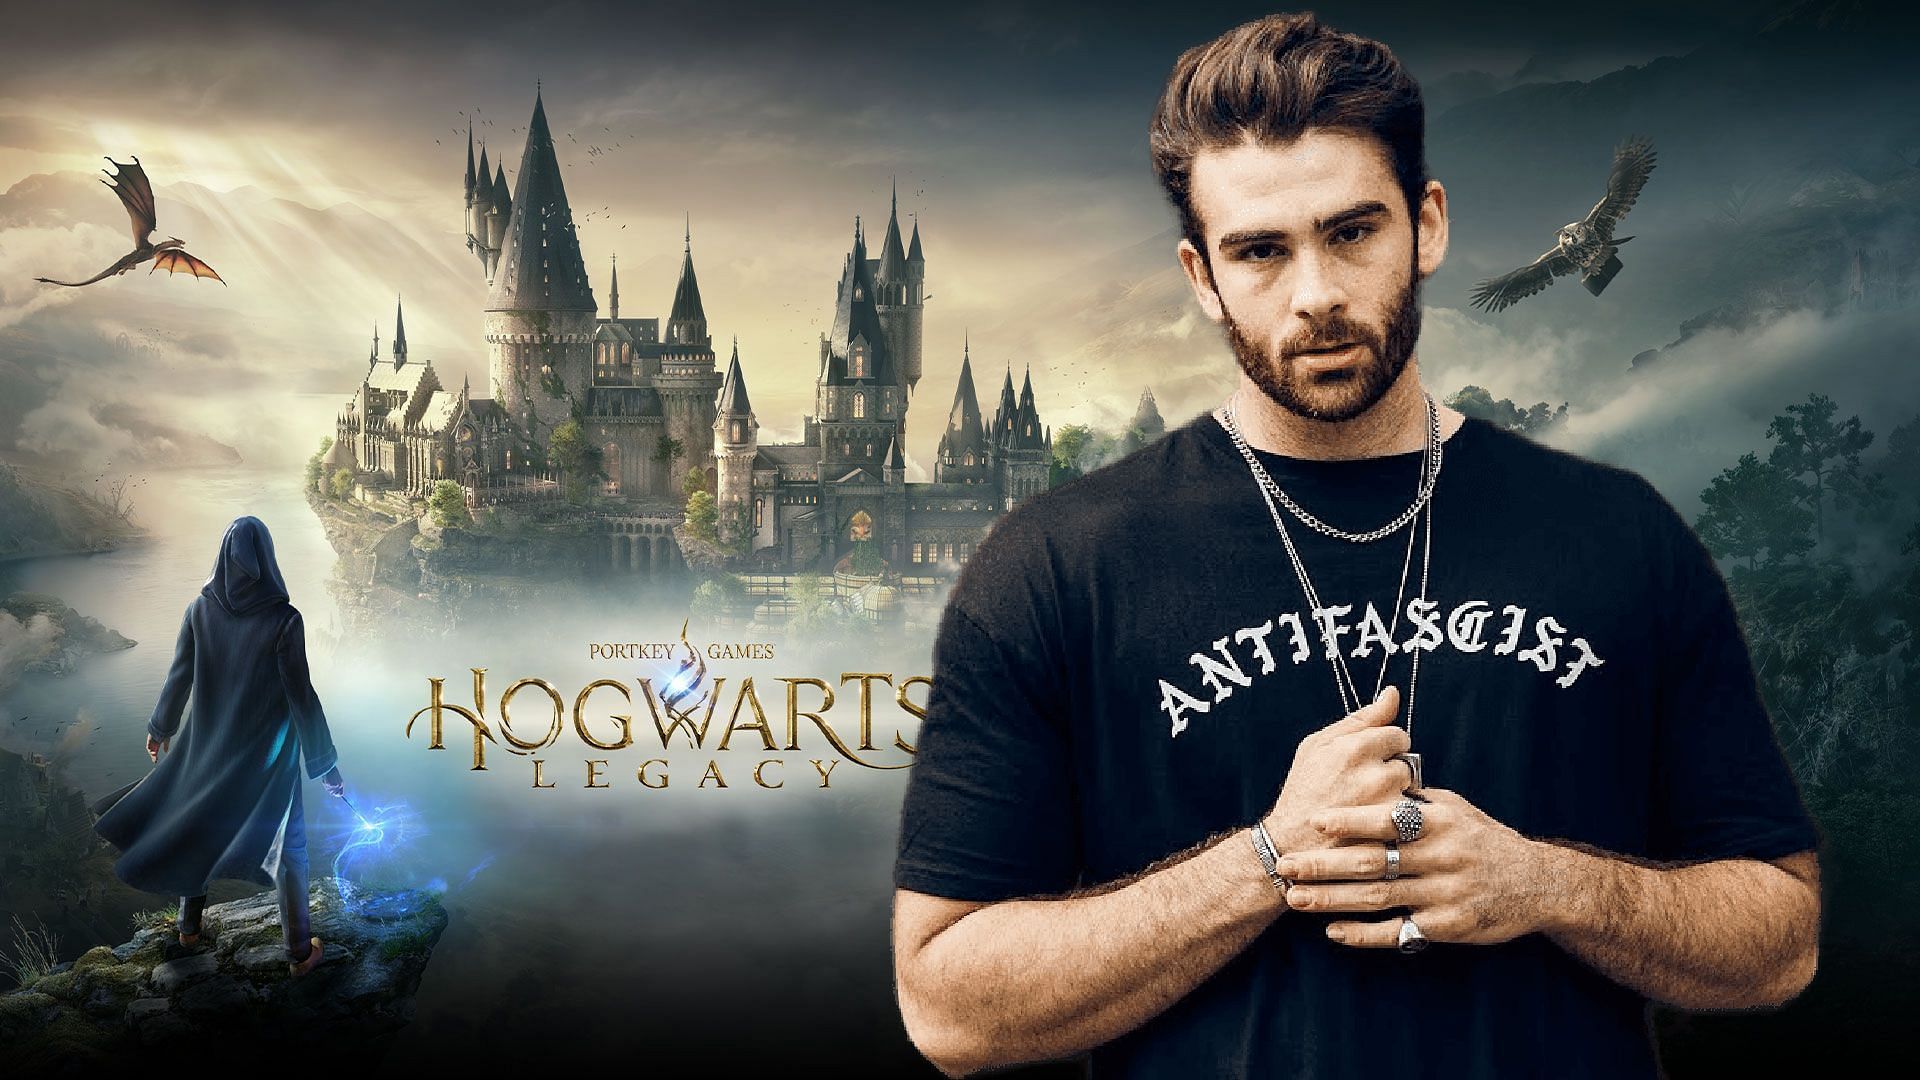 Game not available in Turkey : r/HarryPotterGame